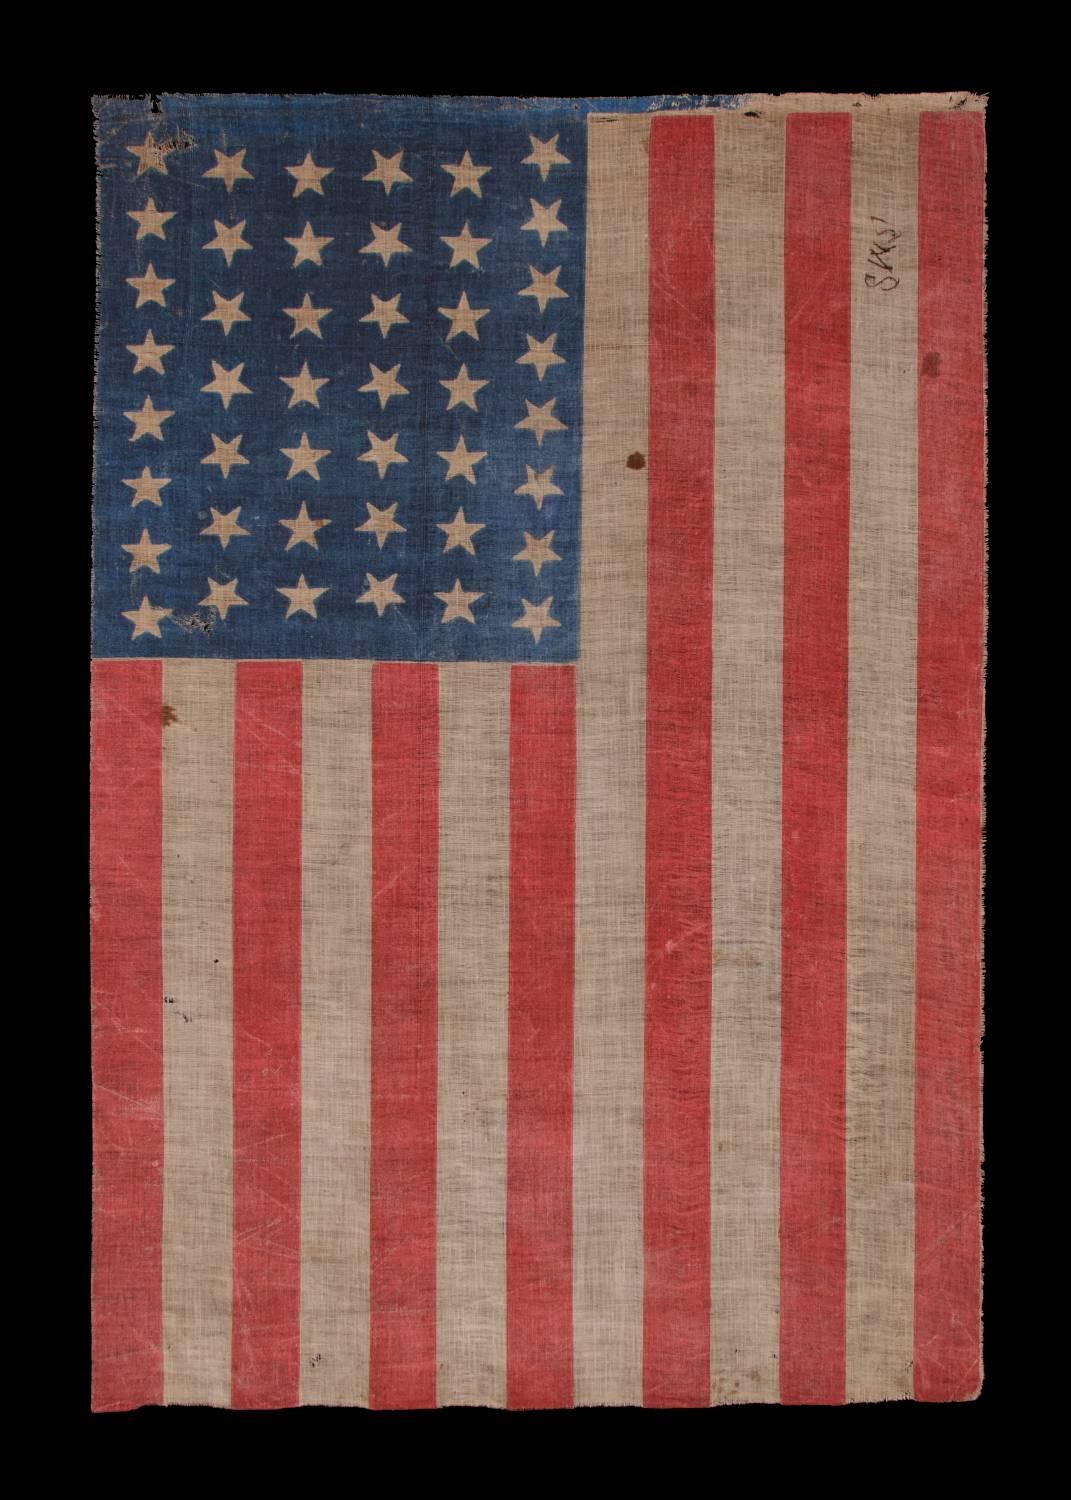 44 STARS IN DANCING ROWS IN AN HOURGLASS FORMATION, ON AN ANTIQUE AMERICAN PARADE FLAG, 1890-1896, REFLECTS WYOMING STATEHOOD:

44 star American parade flag, printed on coarse, glazed cotton. The stars are configured in rows of 8-7-7-7-7-8, with the